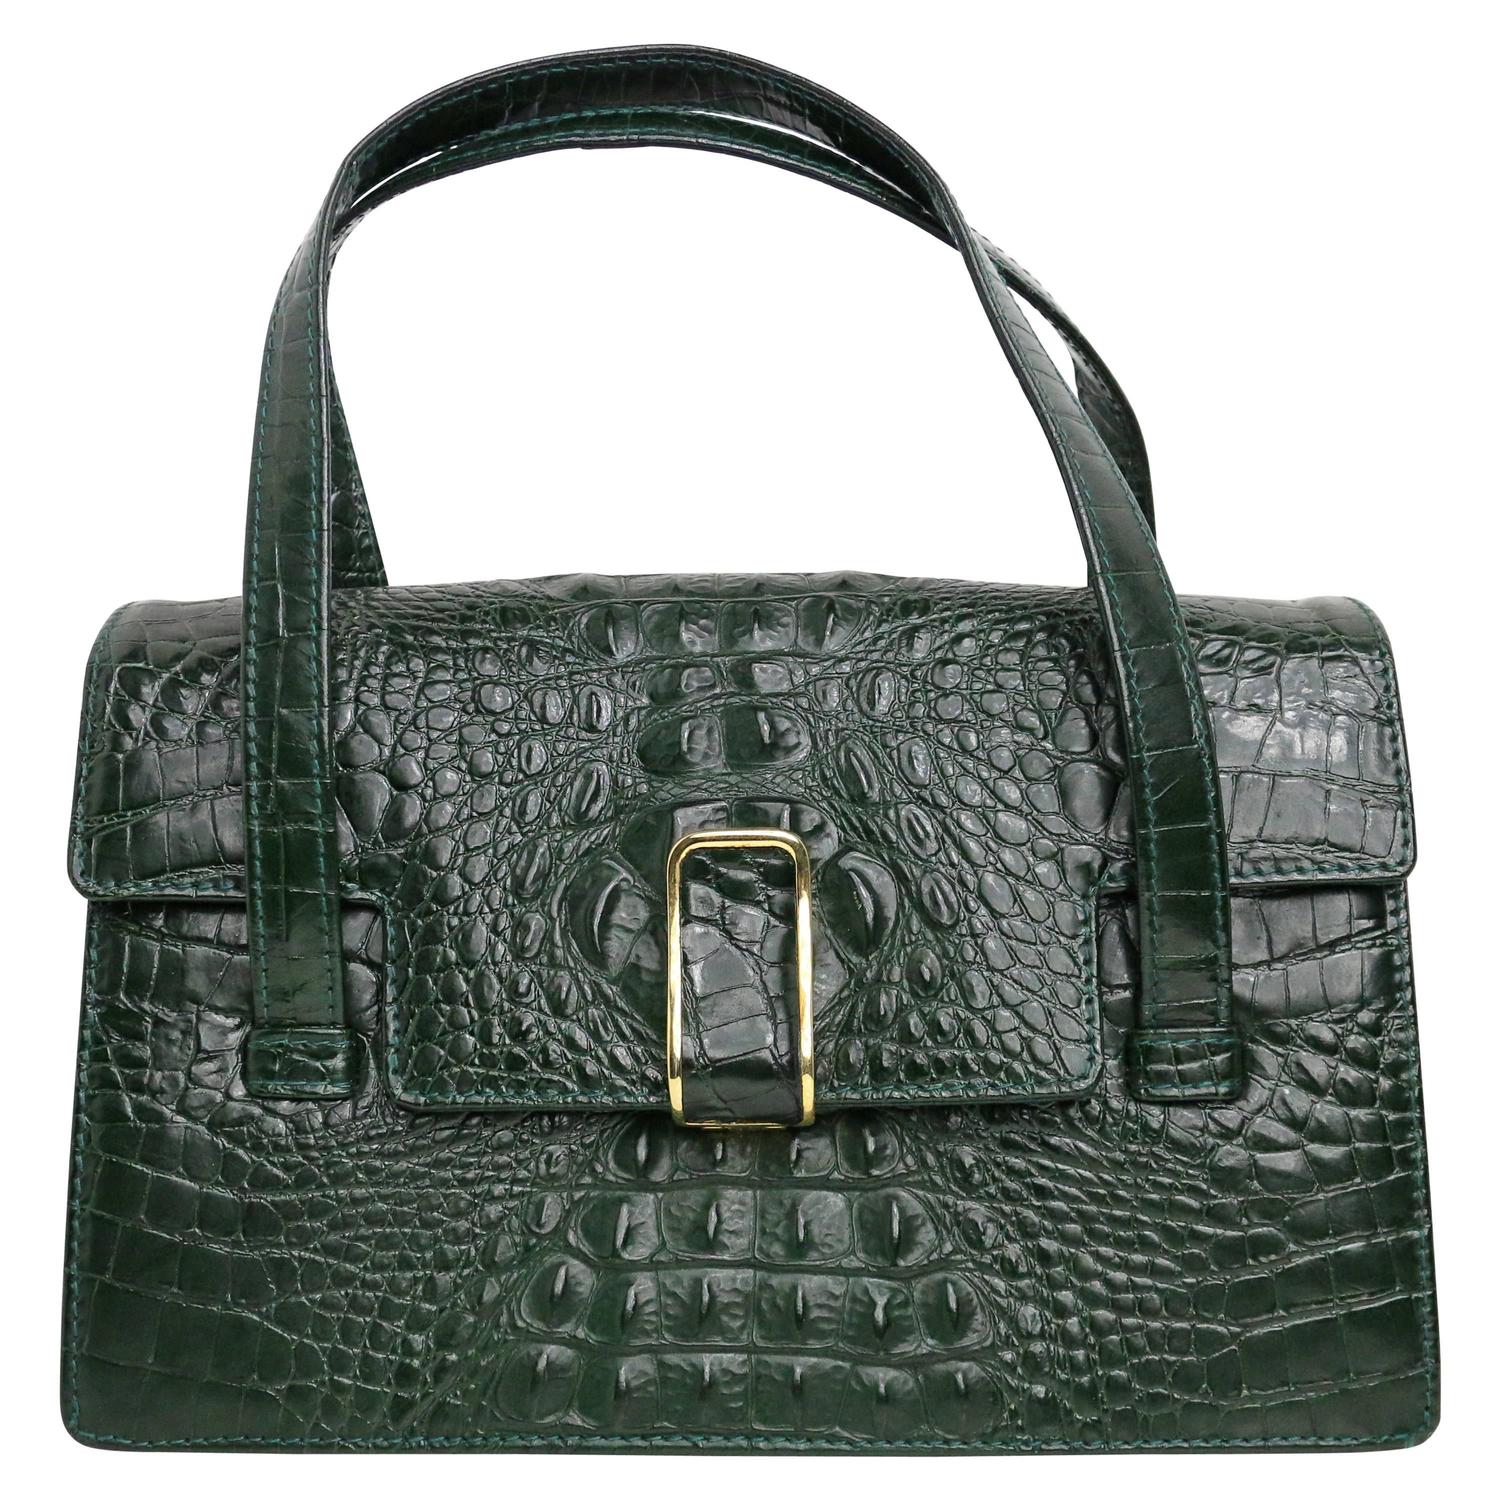 Georges Rech Dark Green Croc Embossed Leather Kelly Style Handbag For ...